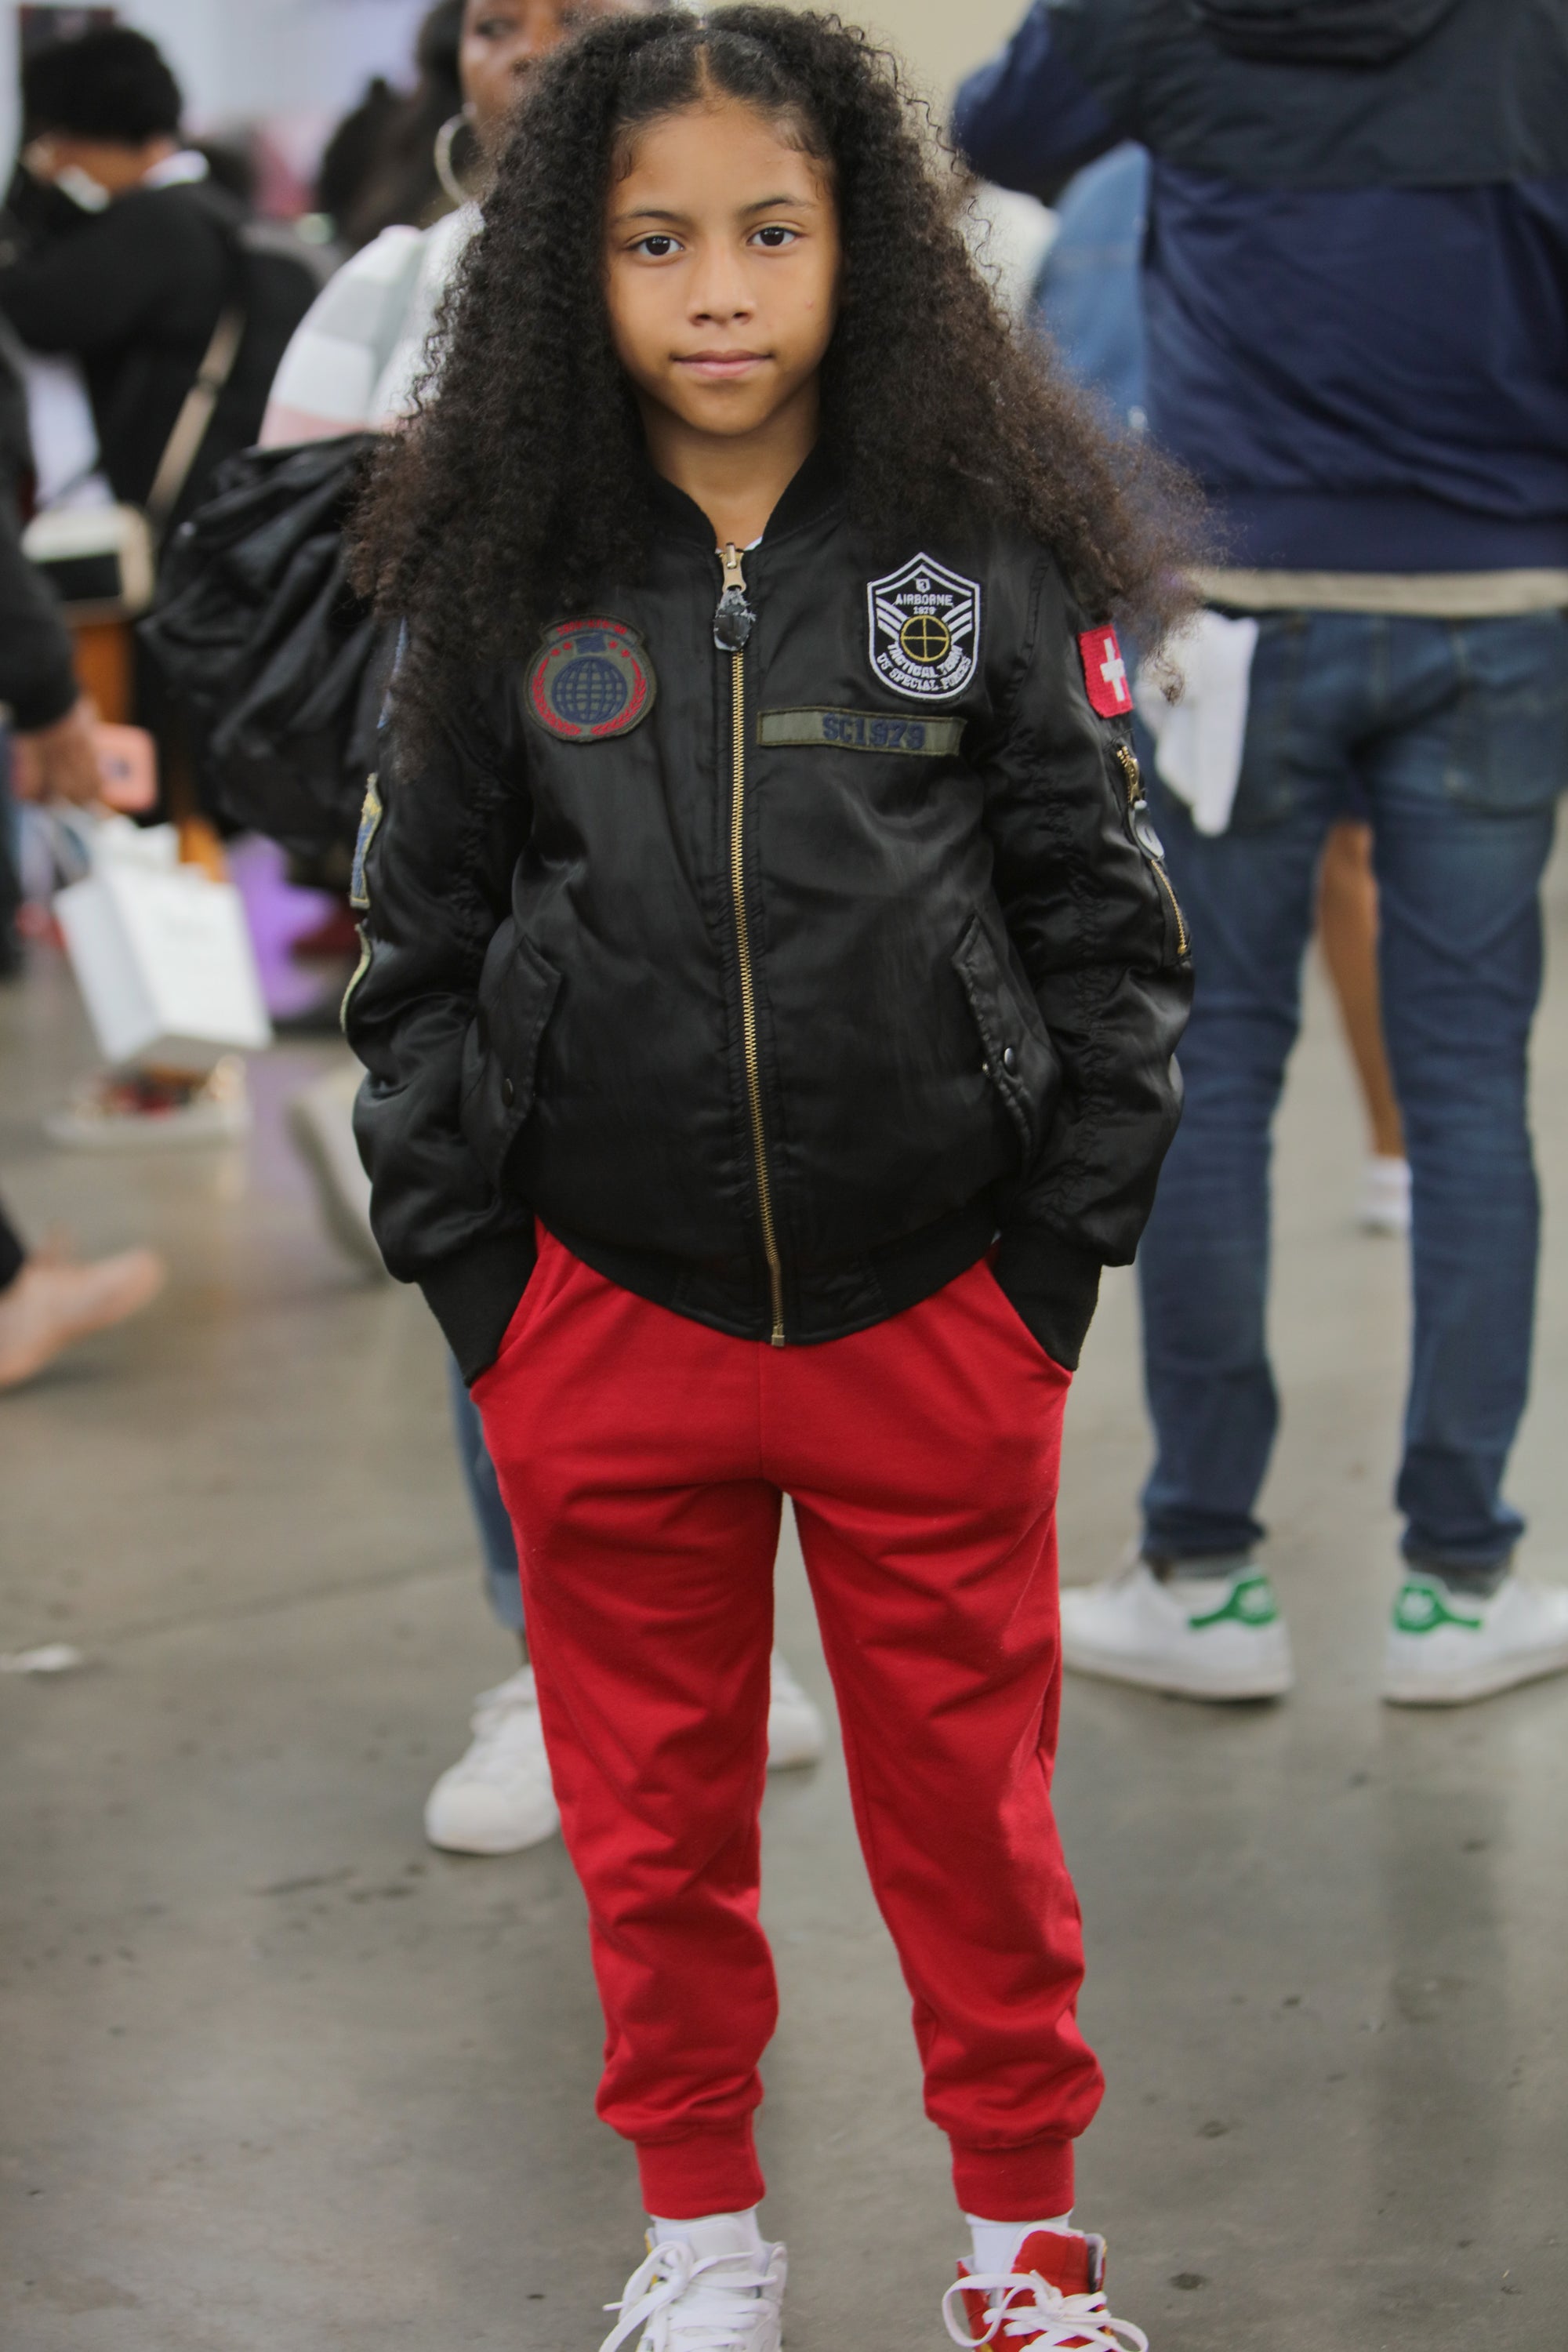 These Tiny Tots And Terrific Teens Gave Us Fashion Looks At Our Street Style Party